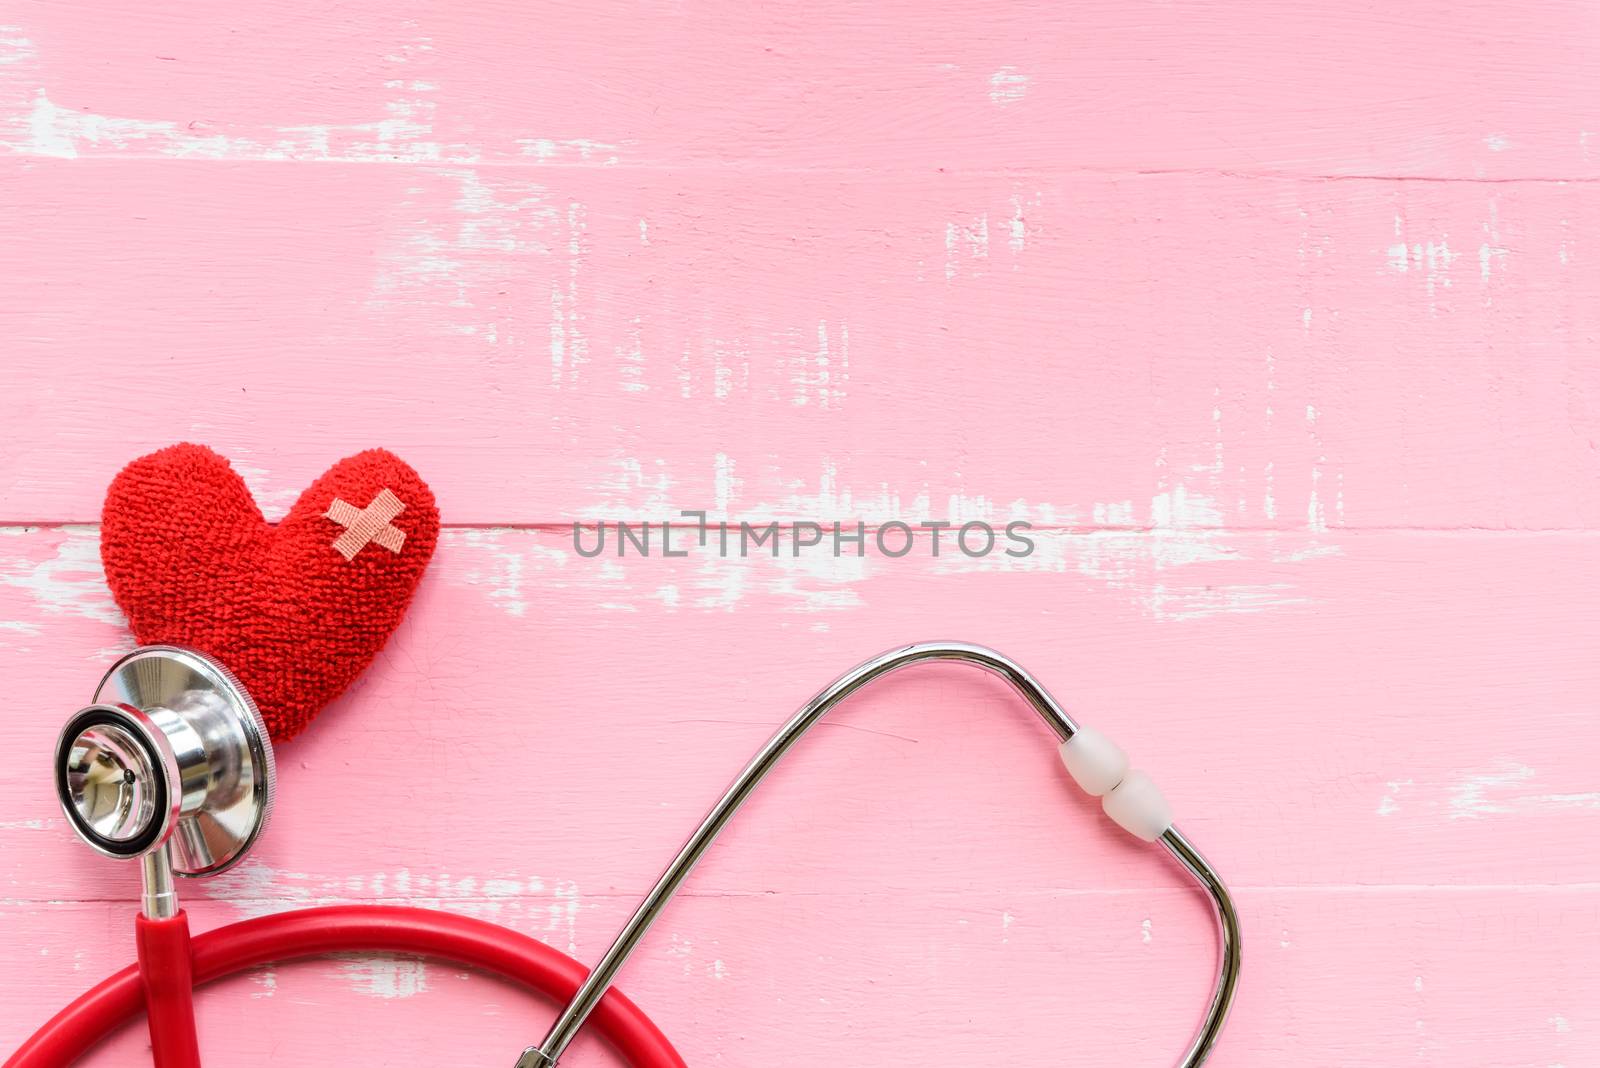 World health day, Healthcare and medical concept. Red heart with Stethoscope, notepad, thermometer and yellow Pill on Pastel white and pink wooden background.